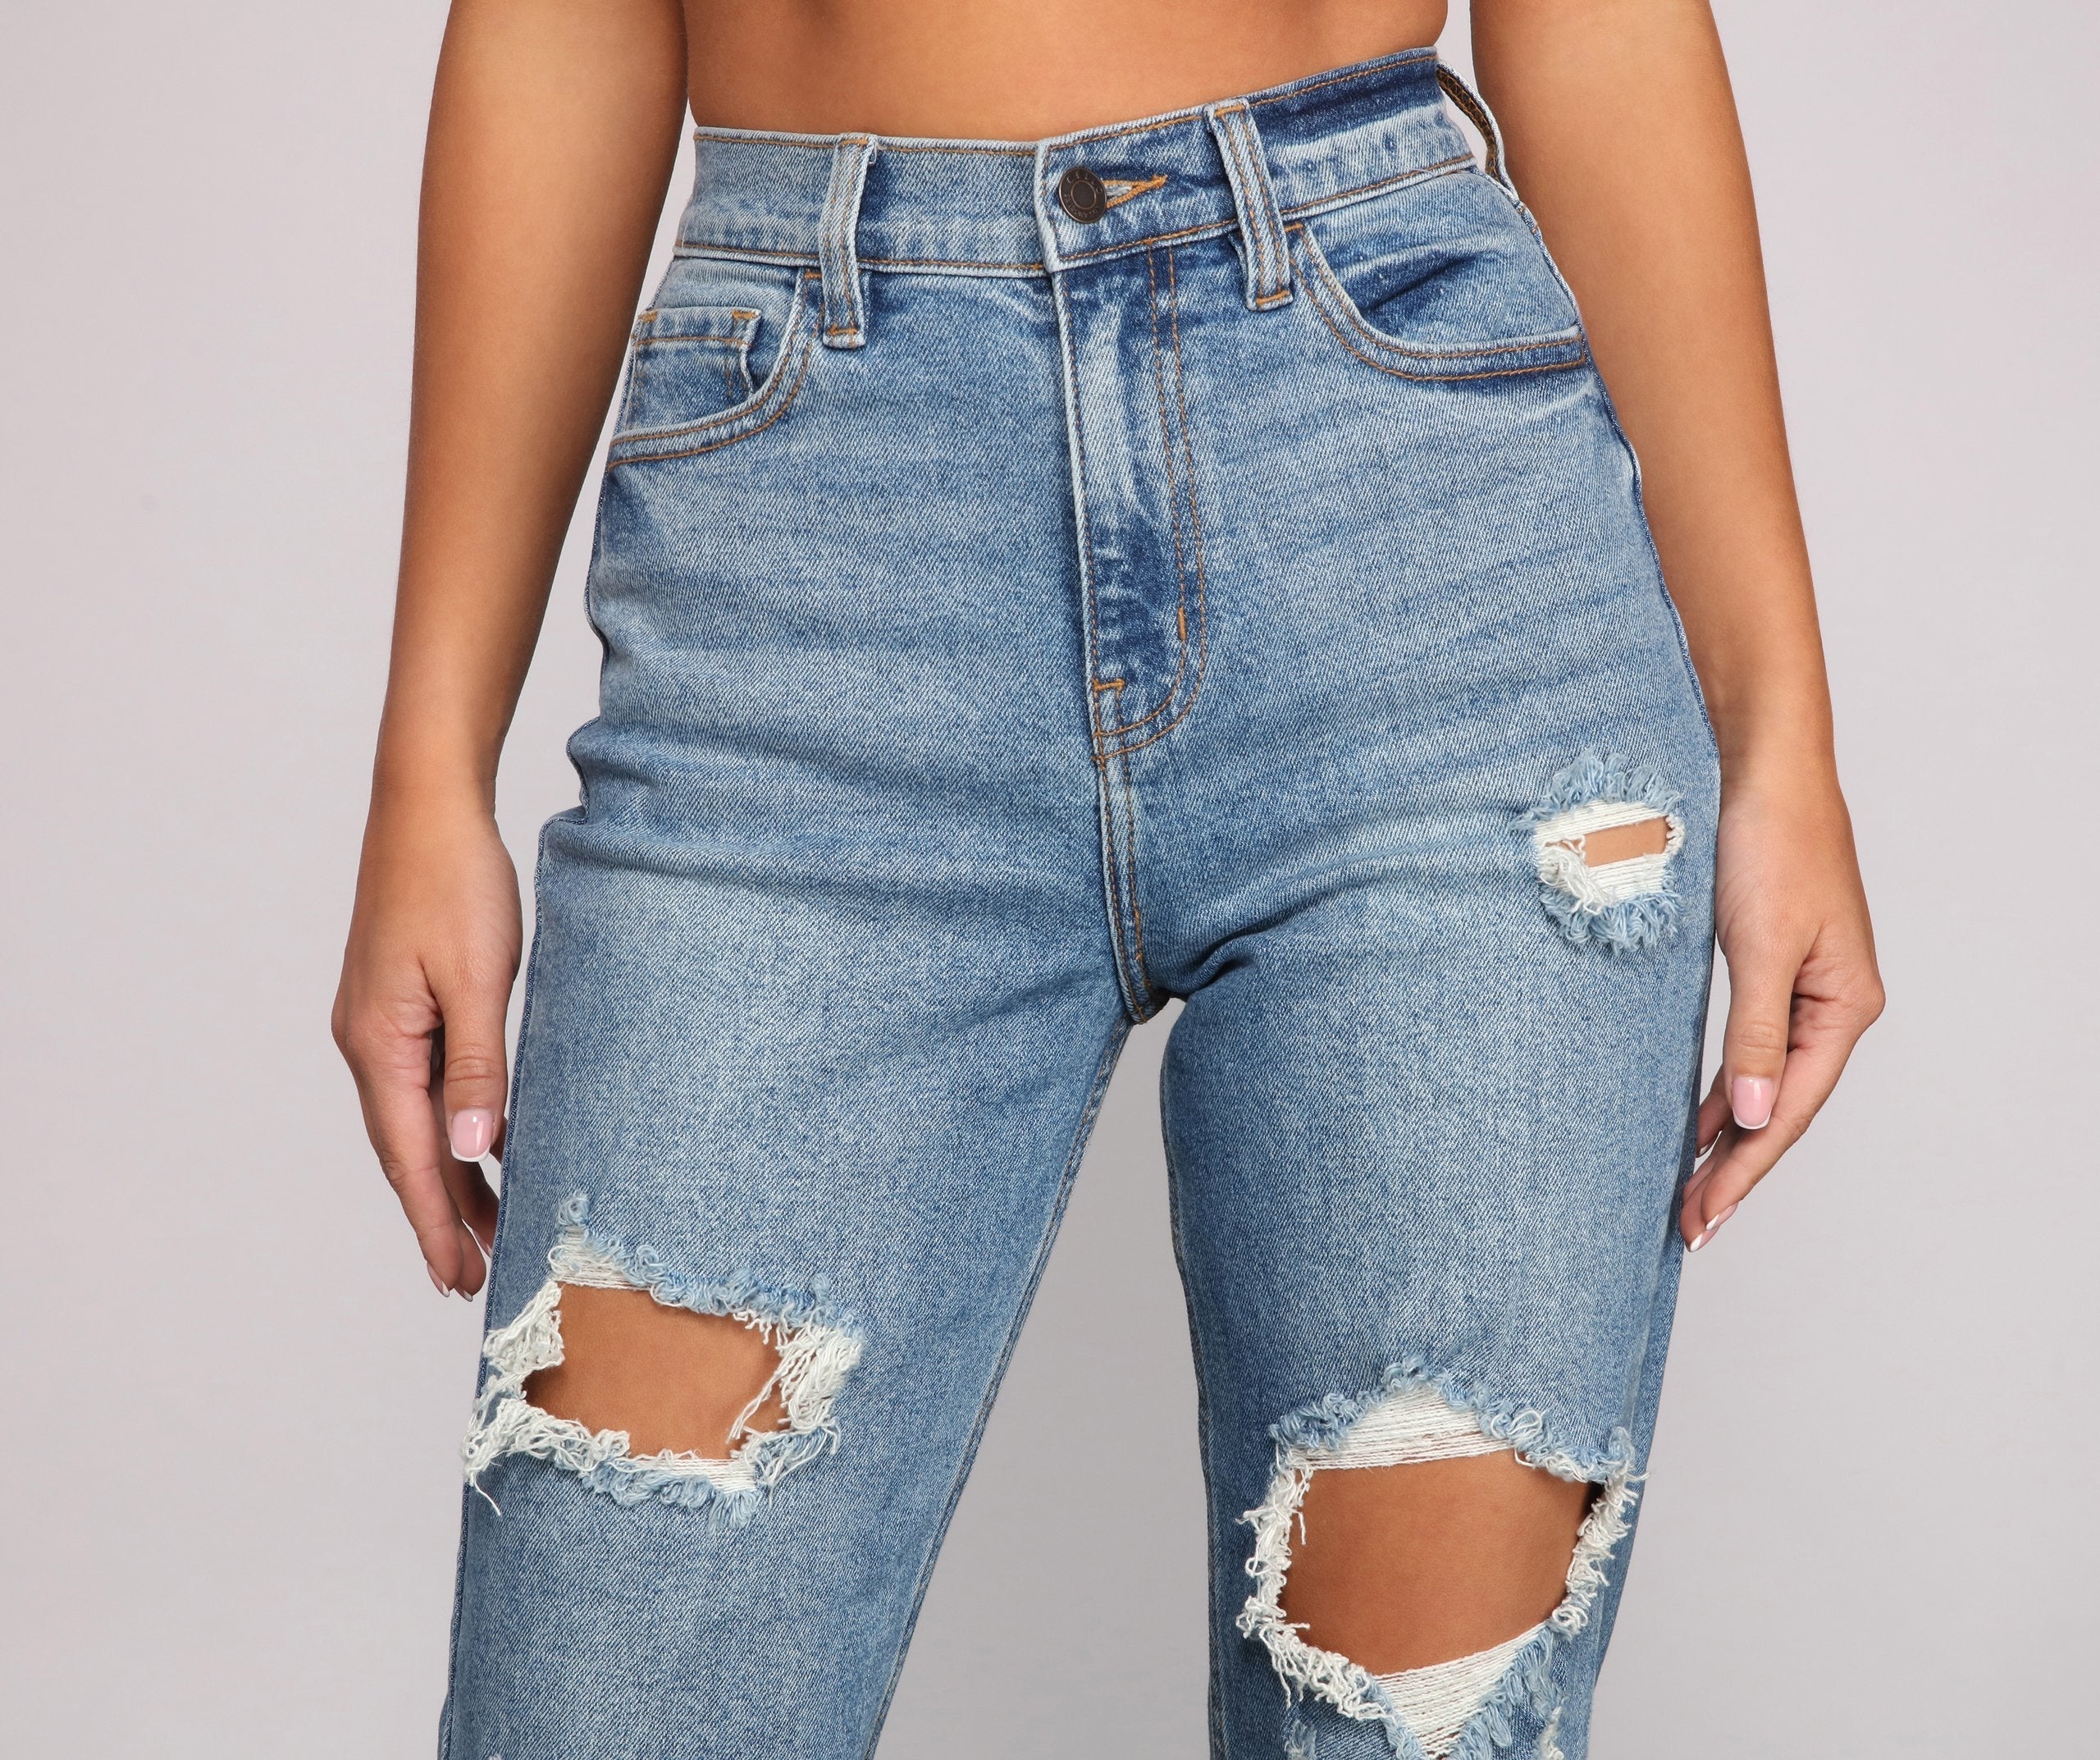 Totally Destructed Cuffed Mom Jeans Sai Feel